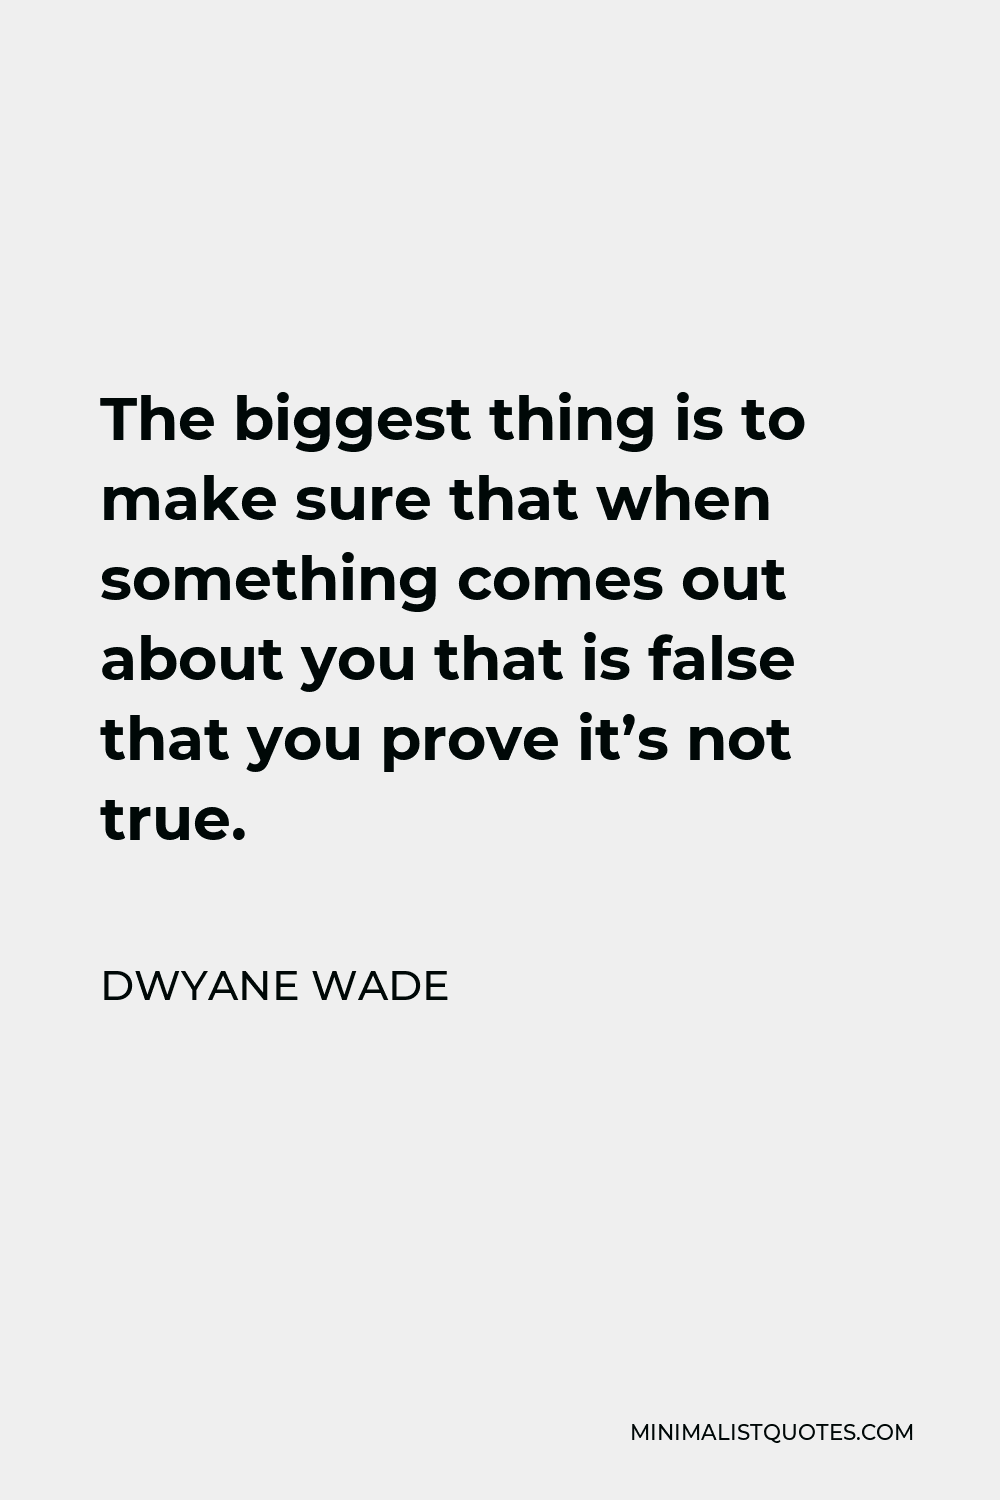 Dwyane Wade Quote - The biggest thing is to make sure that when something comes out about you that is false that you prove it’s not true.